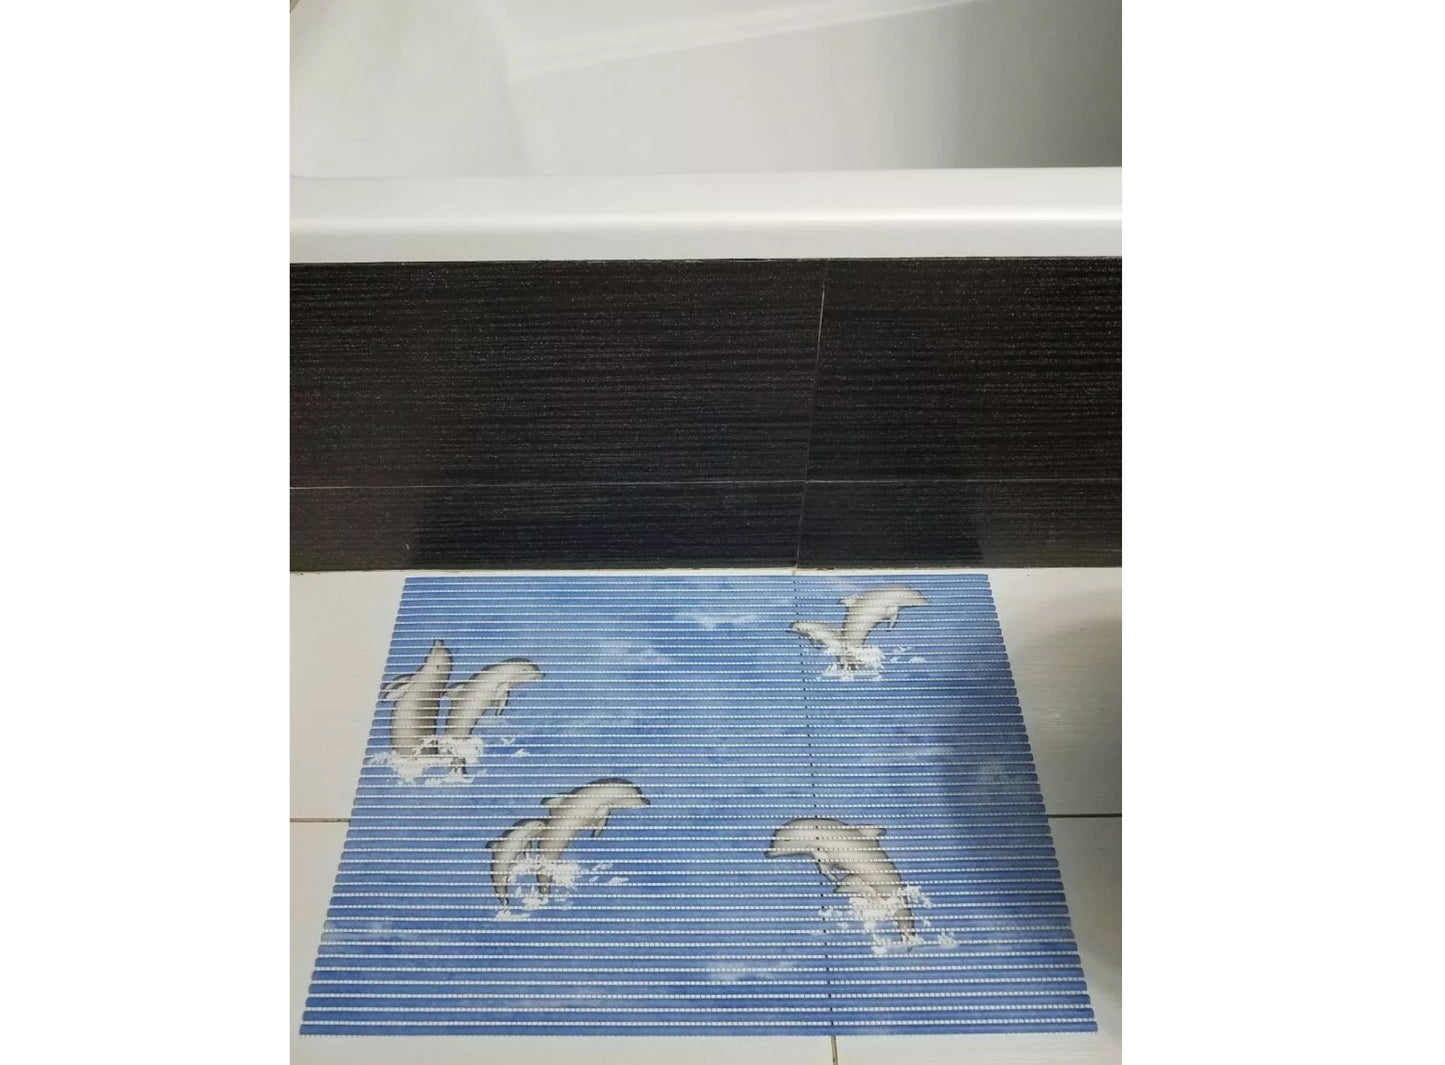 Cushioned Non-Slip/Rubber Runner/Doormat, Easy Cut to Fit in Your Hallway, Bathroom or Kitchen with Scissors,